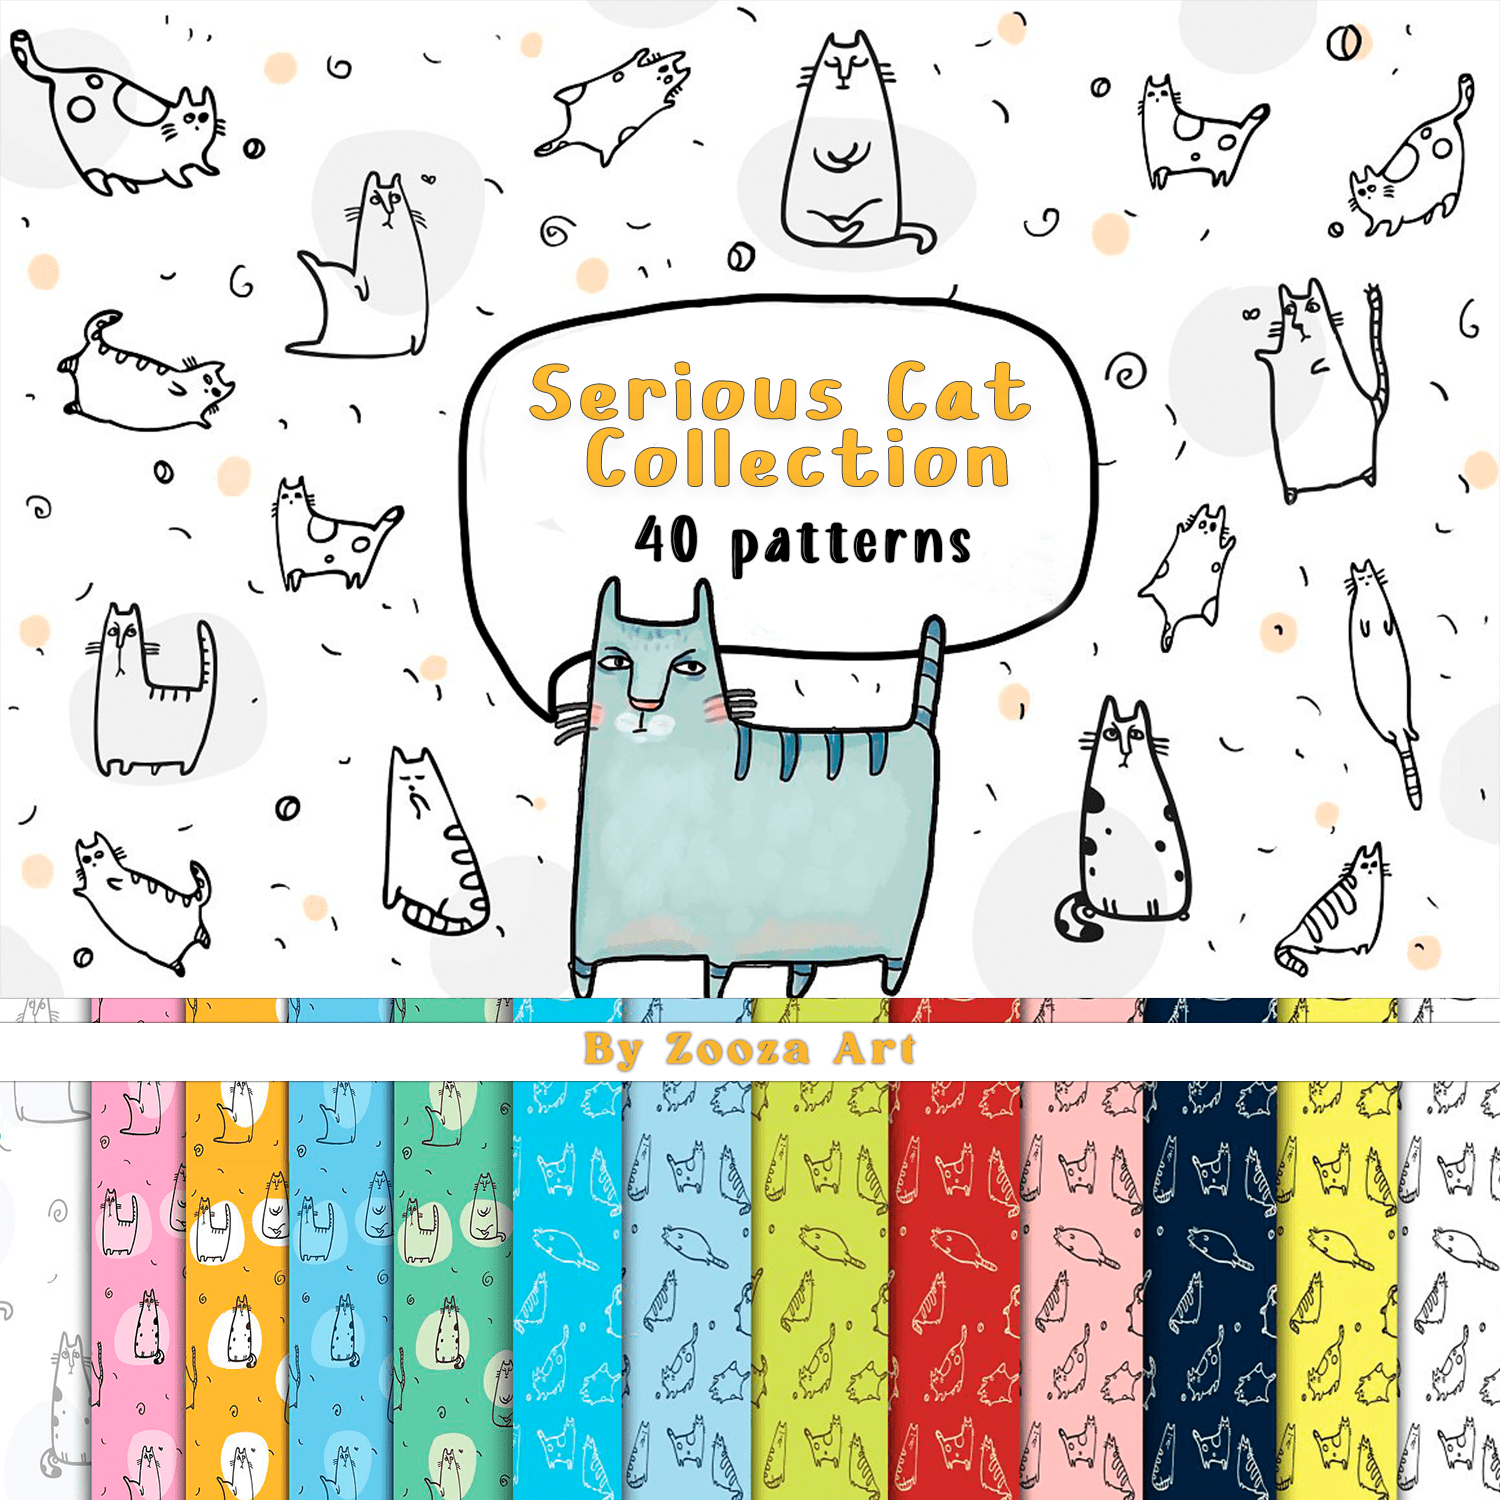 Serious Cat Collection - 40 patterns cover.